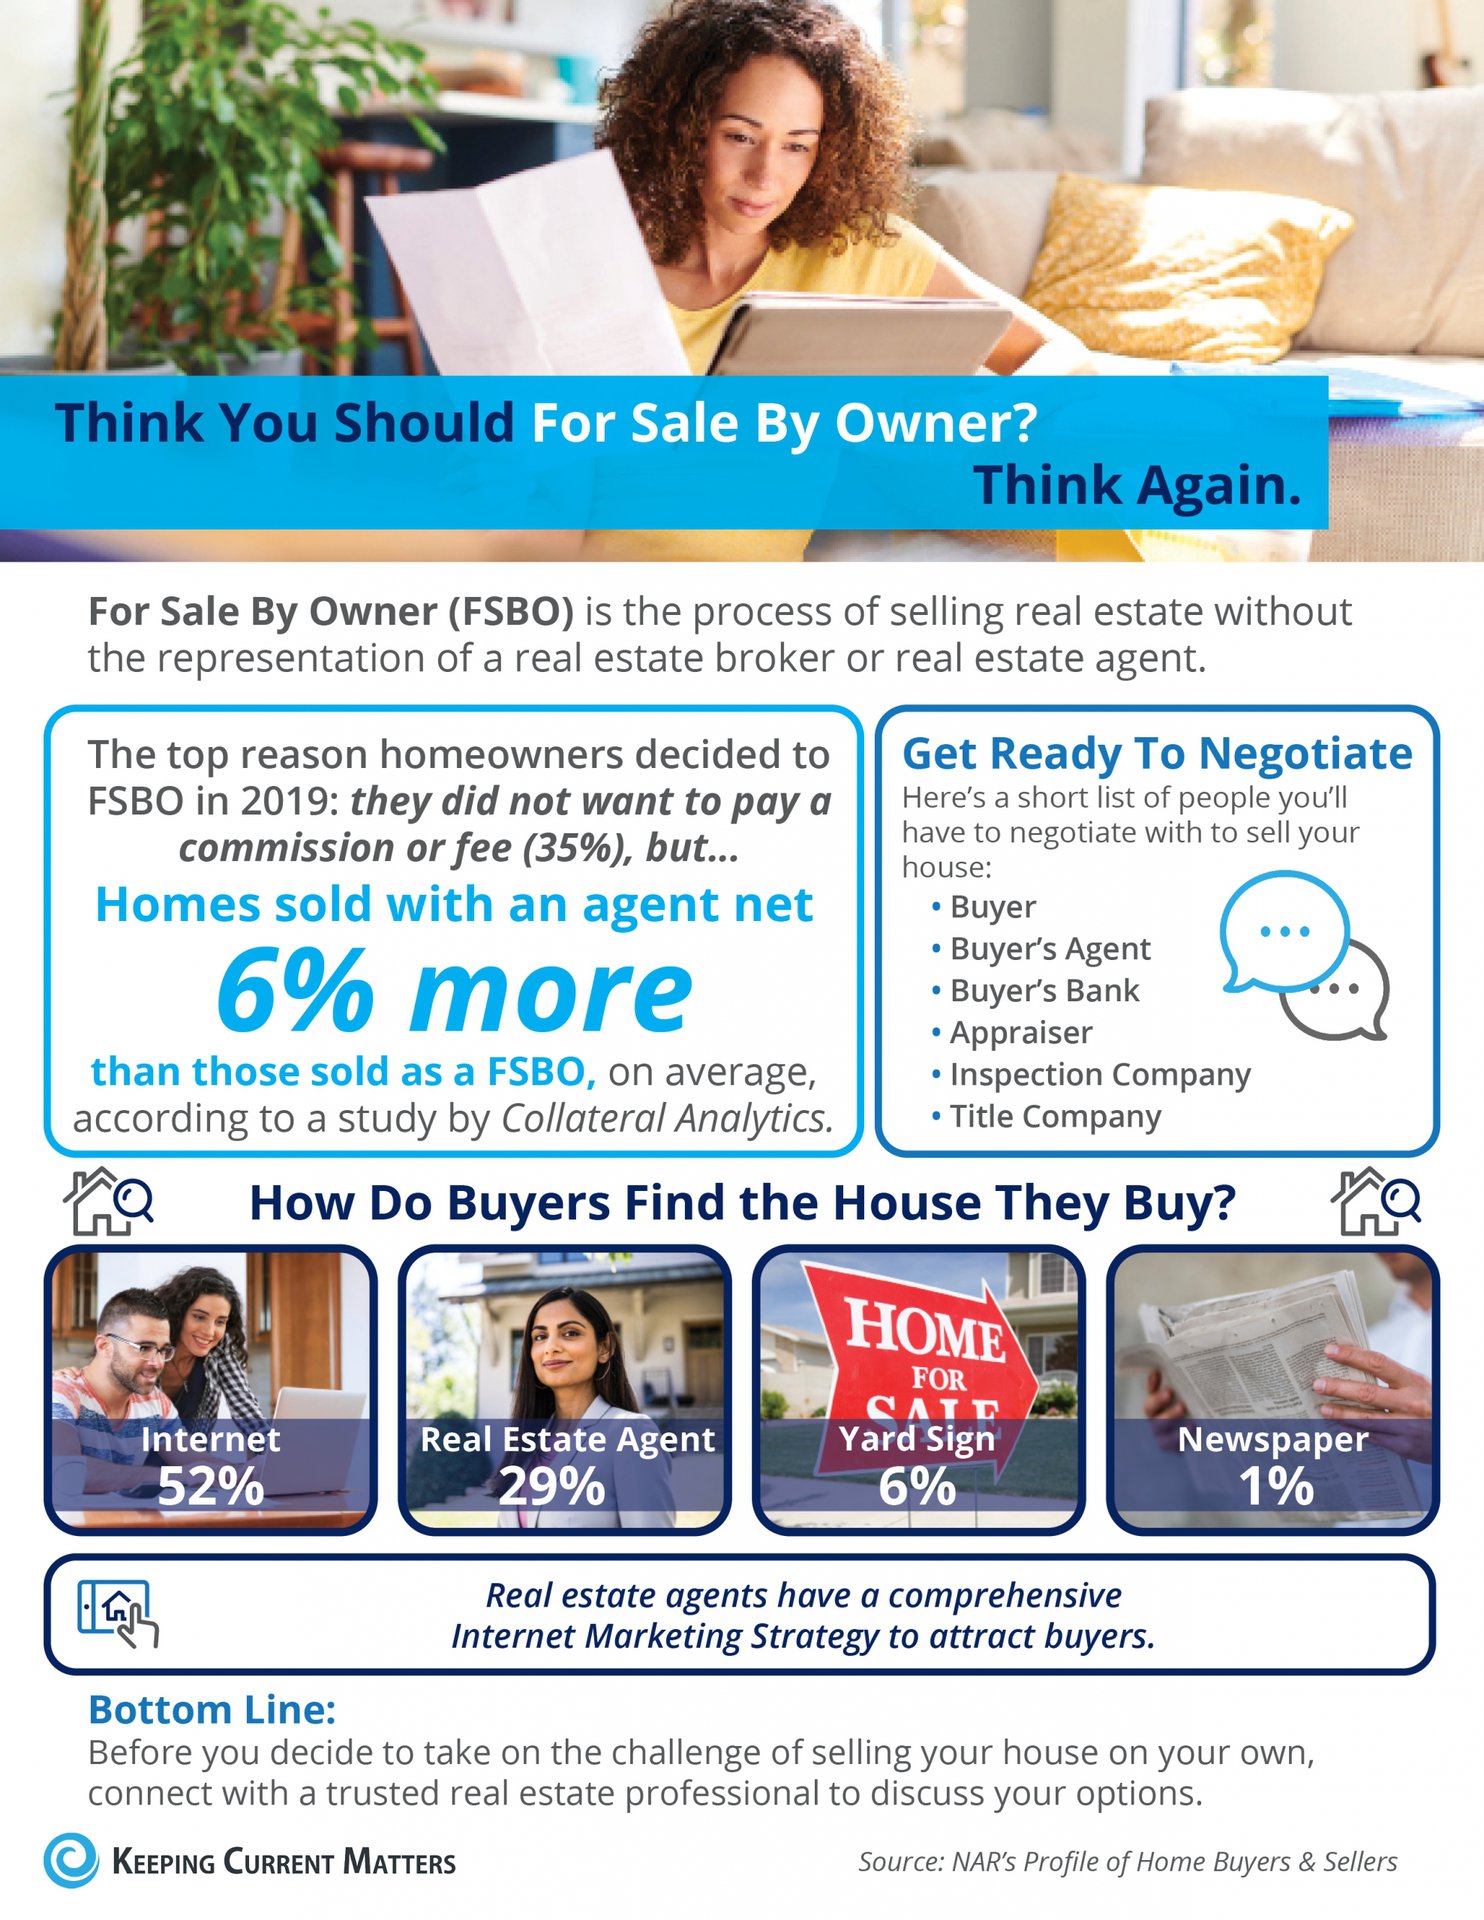 Think You Should For Sale By Owner? Think Again [INFOGRAPHIC] | Keeping Current Matters